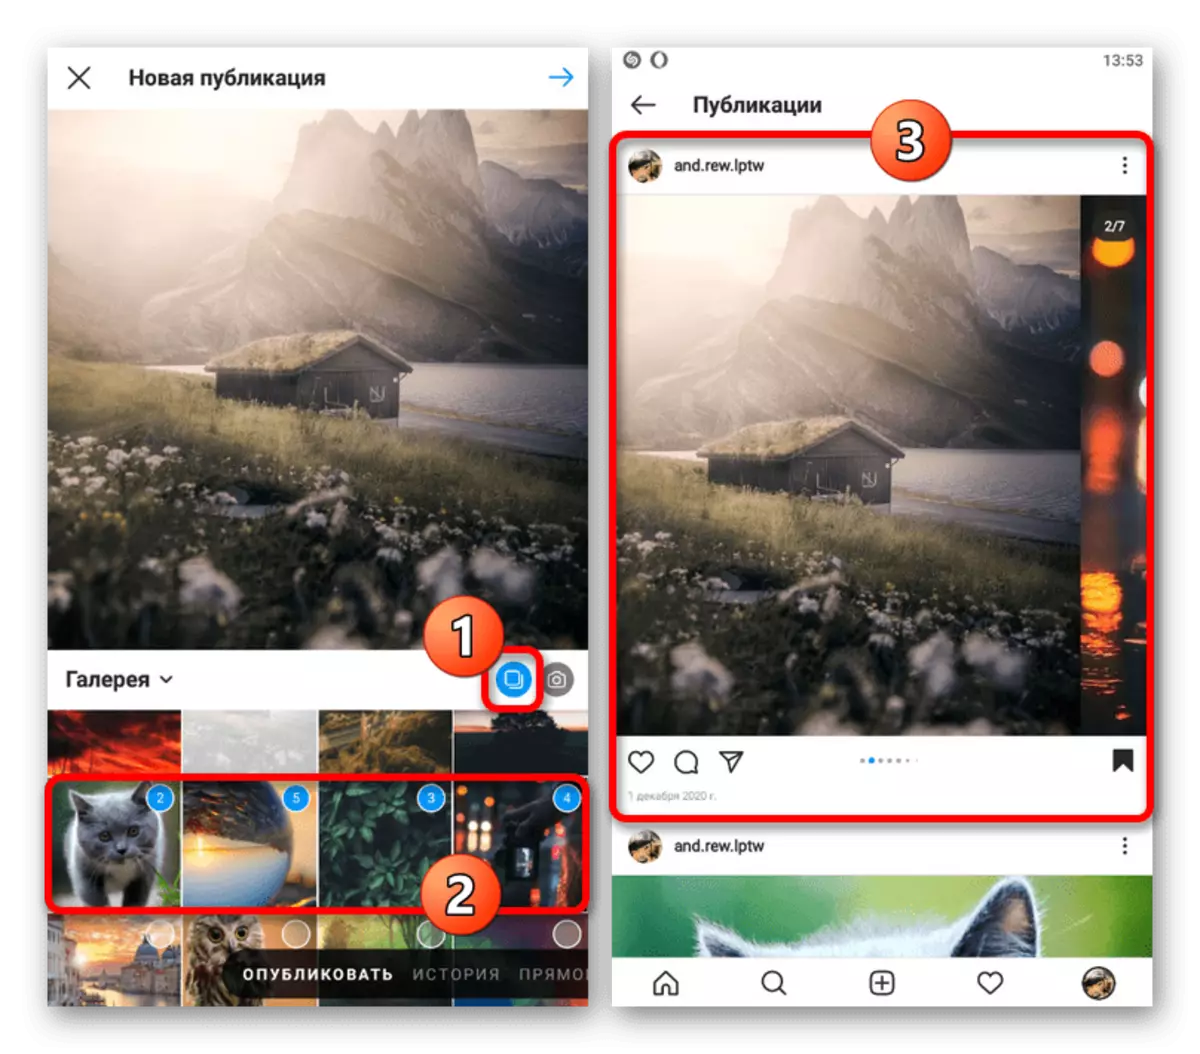 An example of creating a carousel from photos in Instagram Appendix